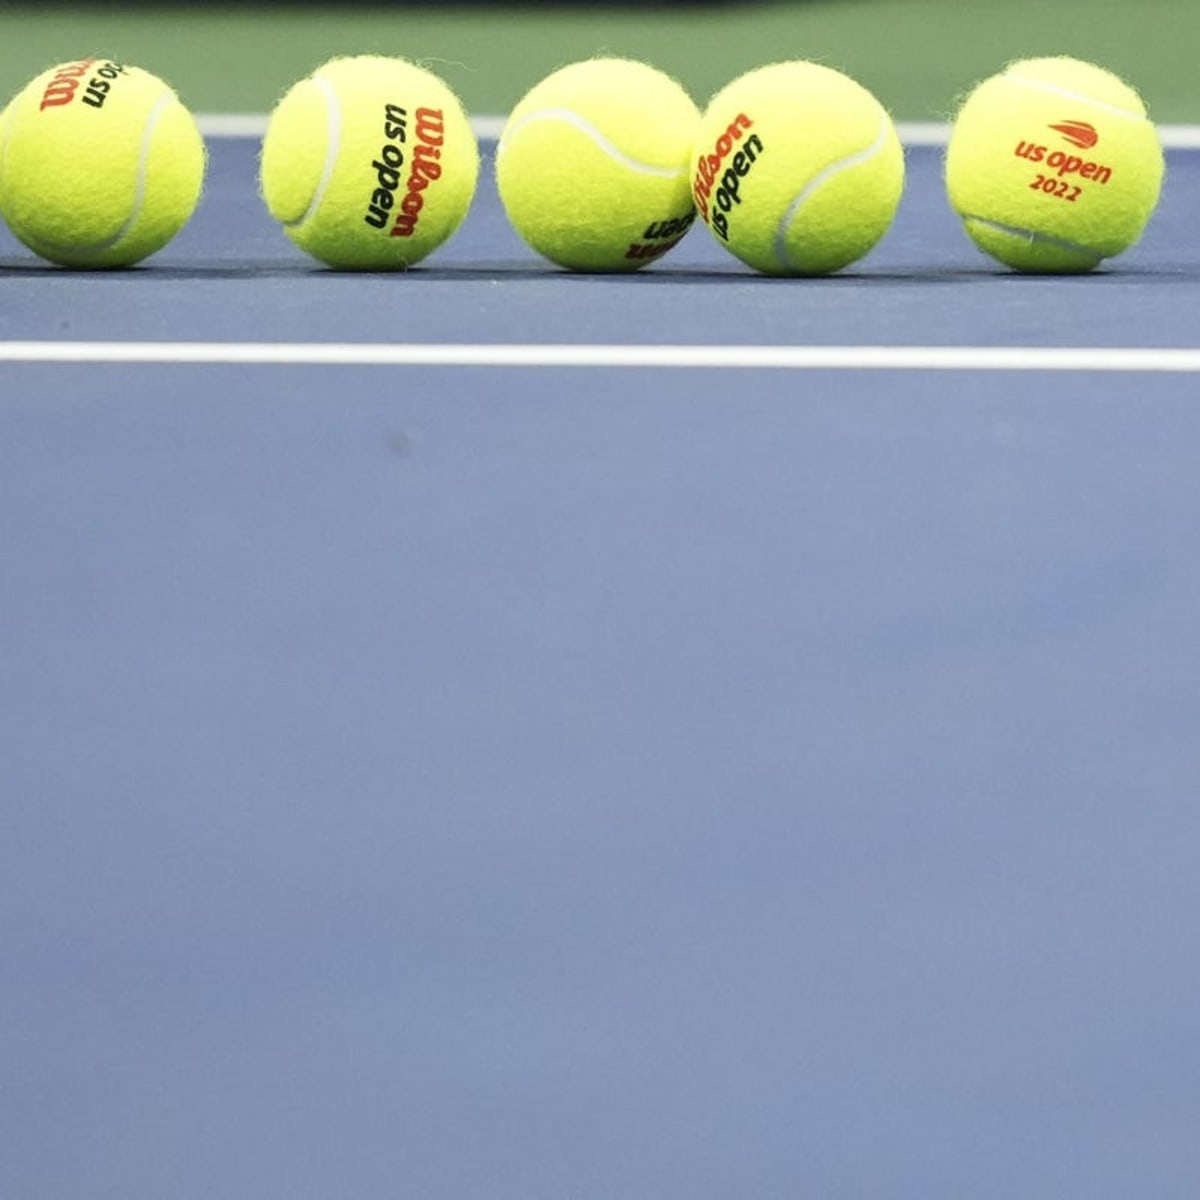 Watch US Open round of 16 Stream tennis live, TV channel - How to Watch and Stream Major League and College Sports